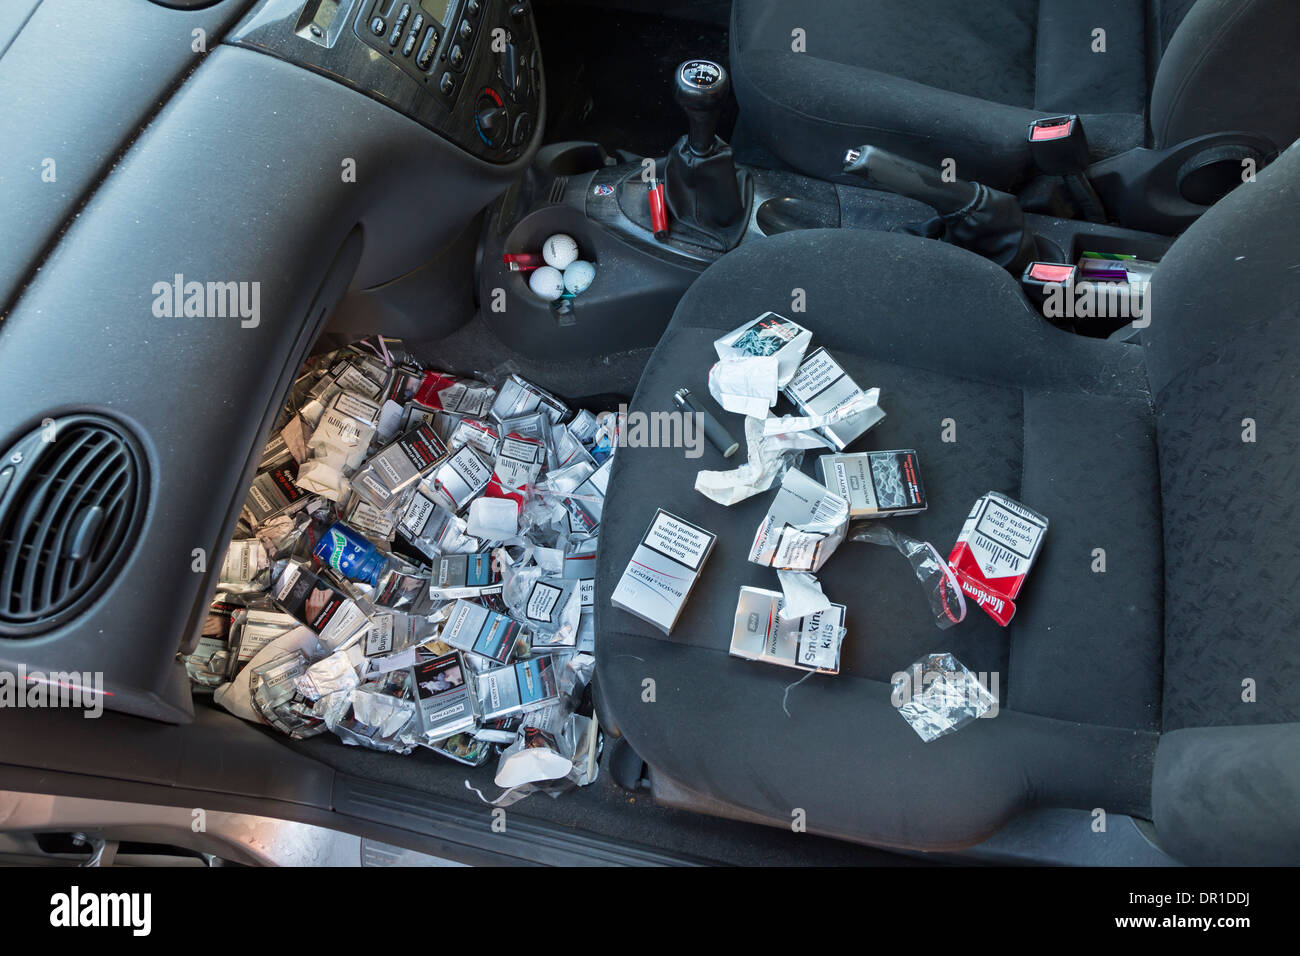 MANY DISCARDED CIGARETTE PACKETS THROWN ON THE FLOOR OF A FORD FOCUS CAR, BY A SMOKER. Stock Photo